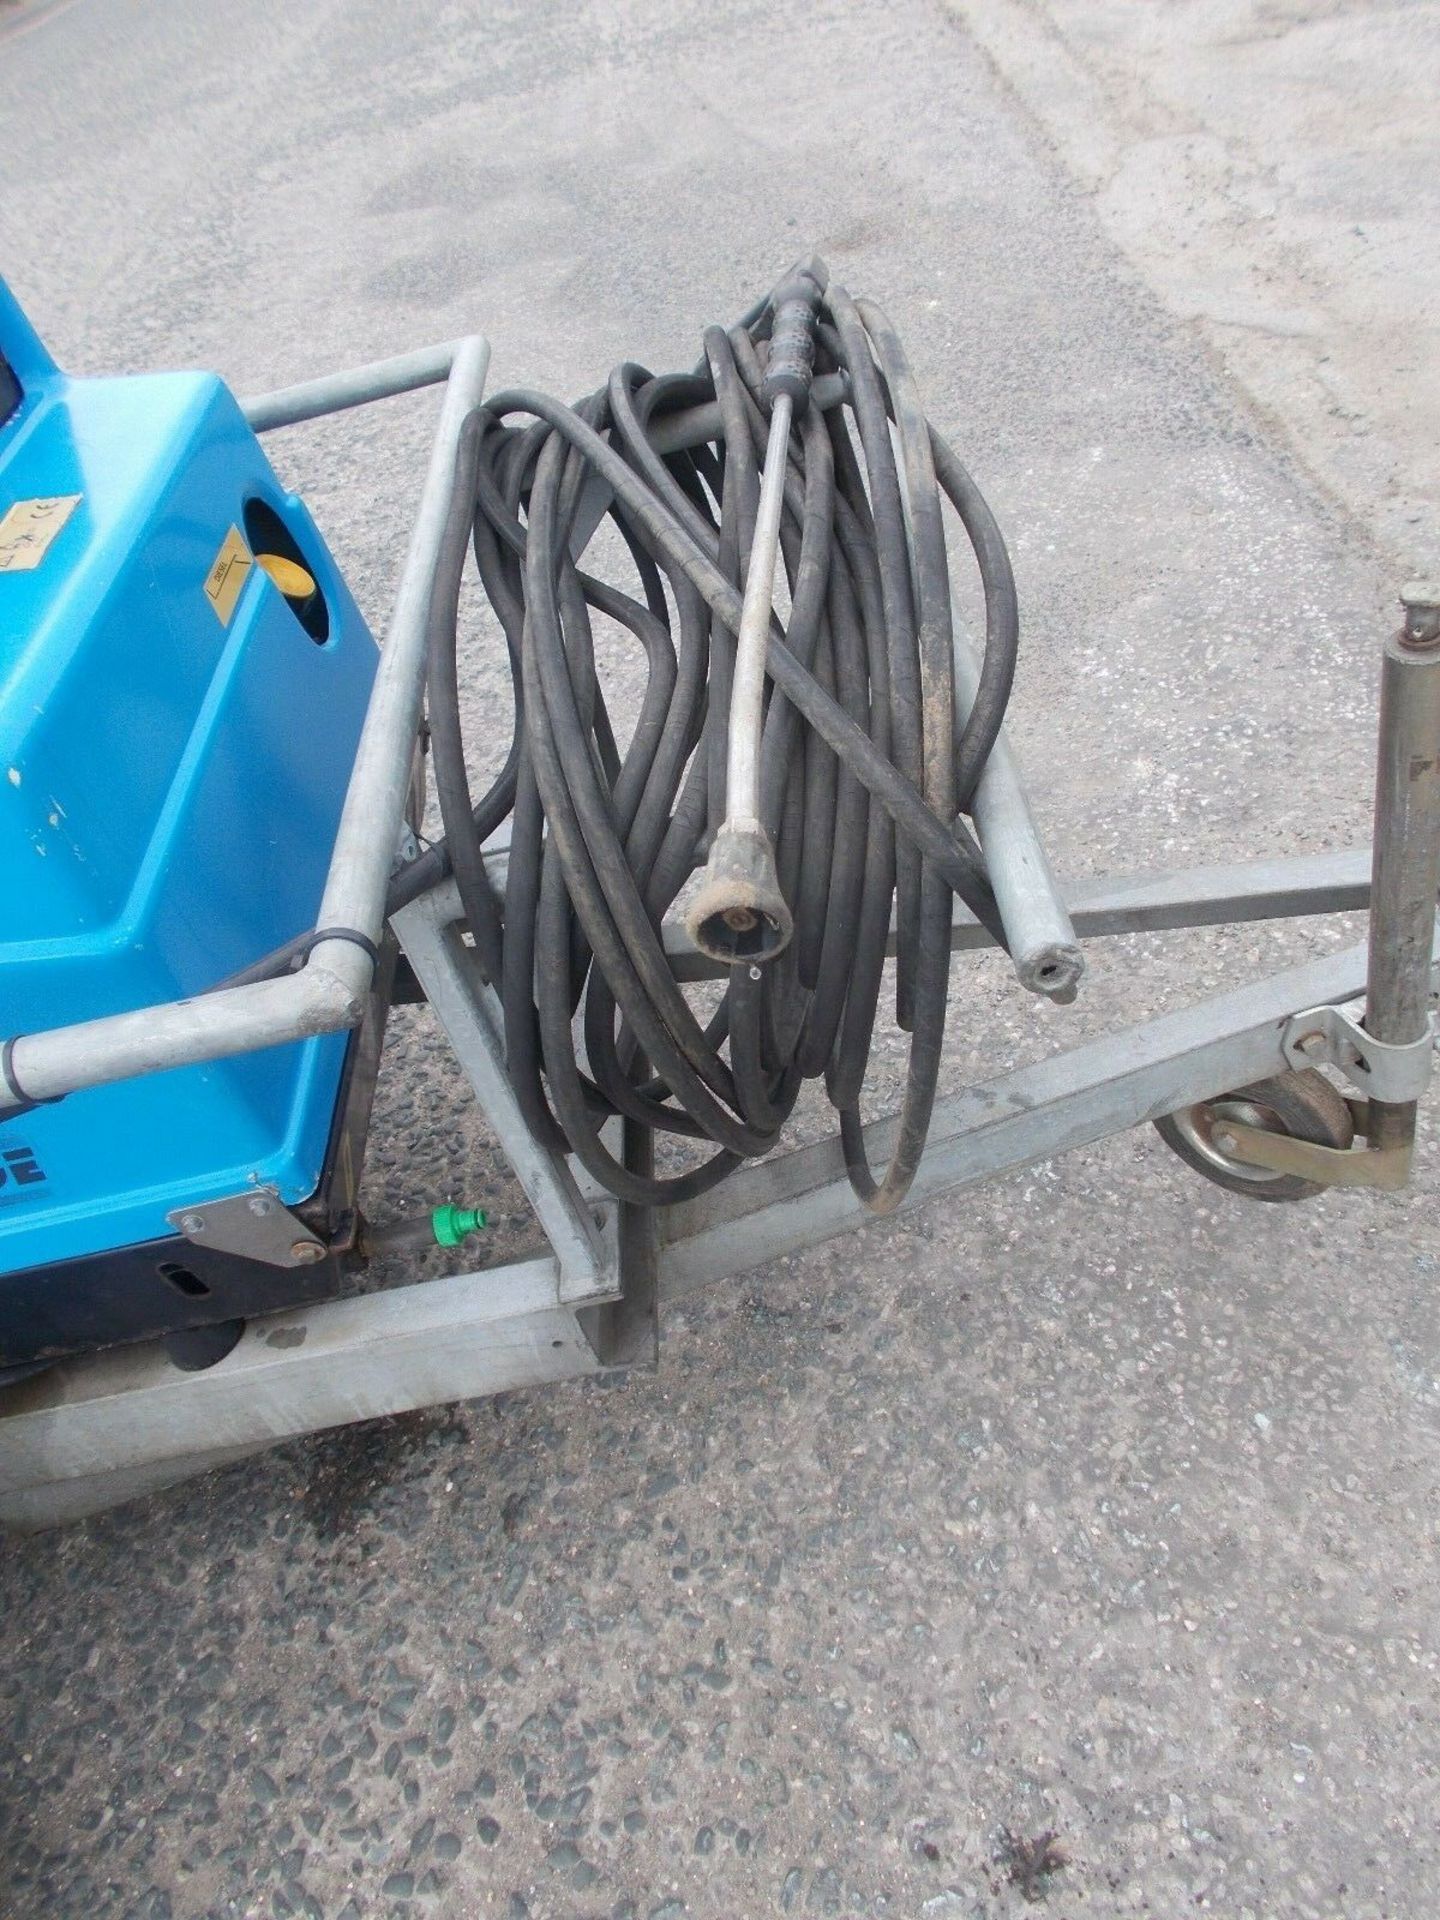 Edge V 200 MD Towable Hot and Cold Diesel Engined Pressure Washer 200 Bar - Image 6 of 7